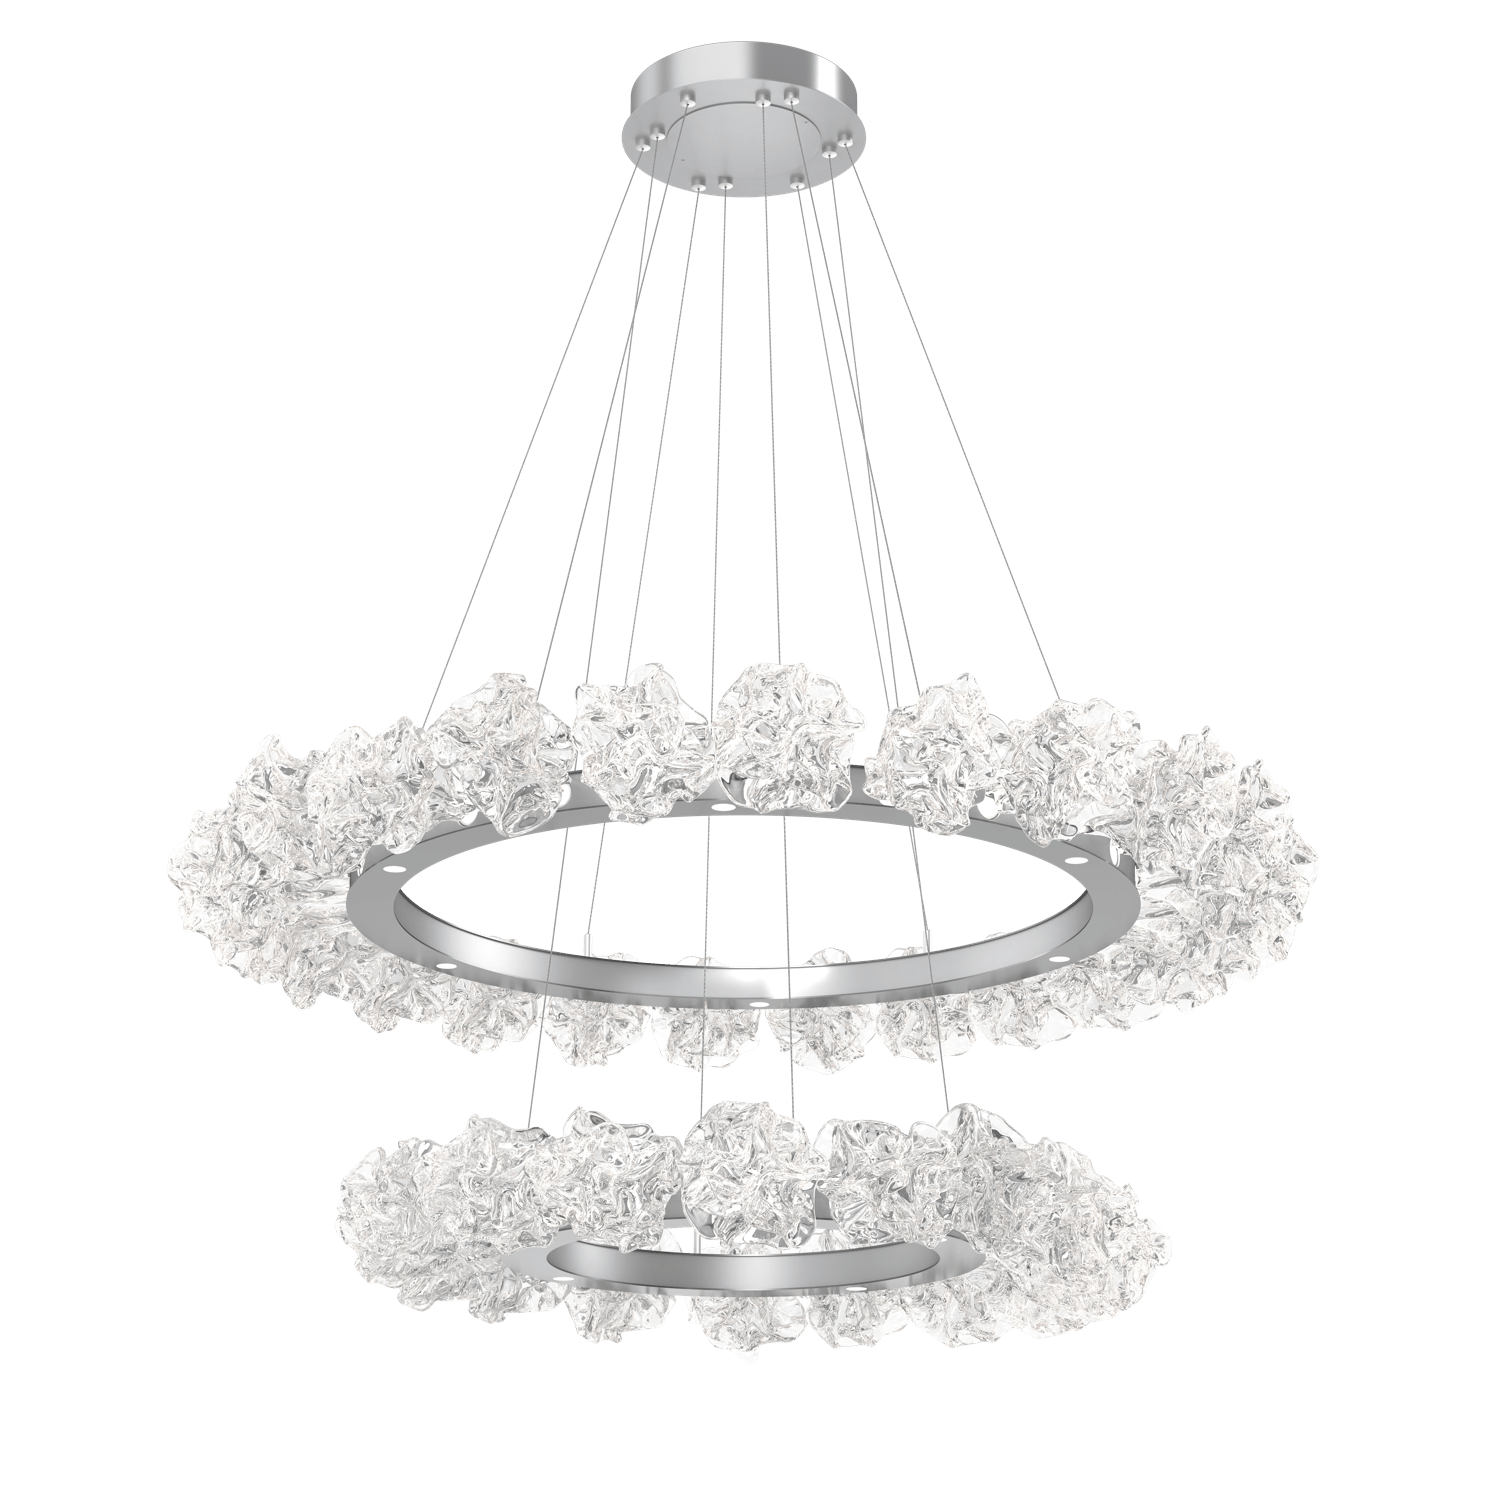 CHB0059-2B-CS-Hammerton-Studio-Blossom-50-inch-two-tier-radial-ring-chandelier-with-classic-silver-finish-and-clear-handblown-crystal-glass-shades-and-LED-lamping